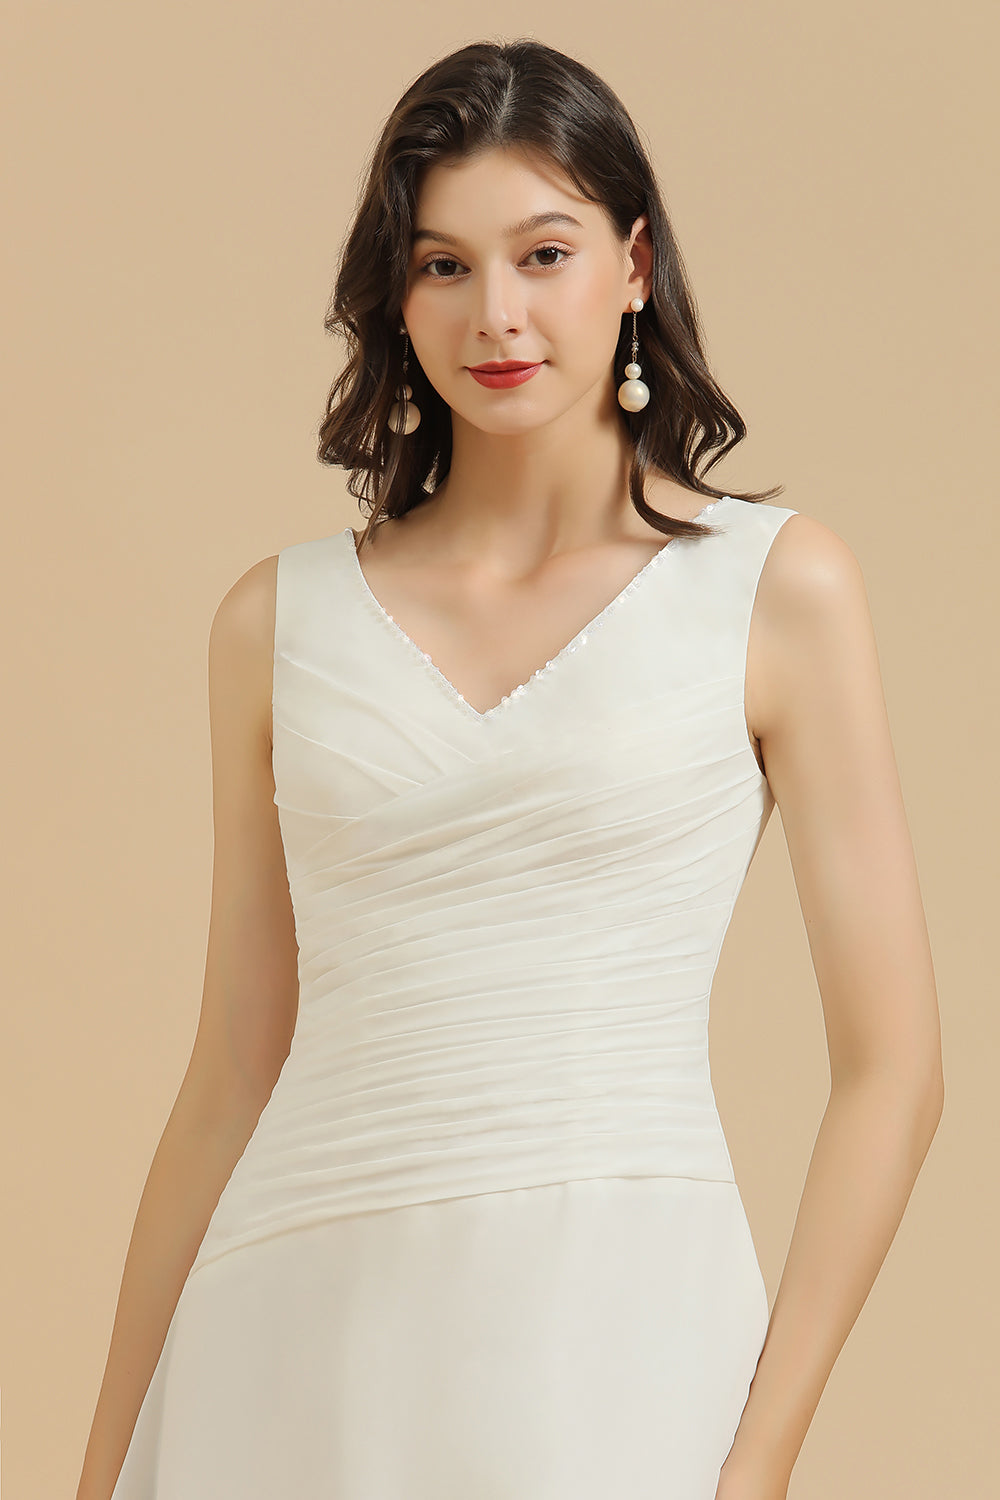 Load image into Gallery viewer, V-Neck Knee-length Chiffon Bridesmaid Dress online-27dress
